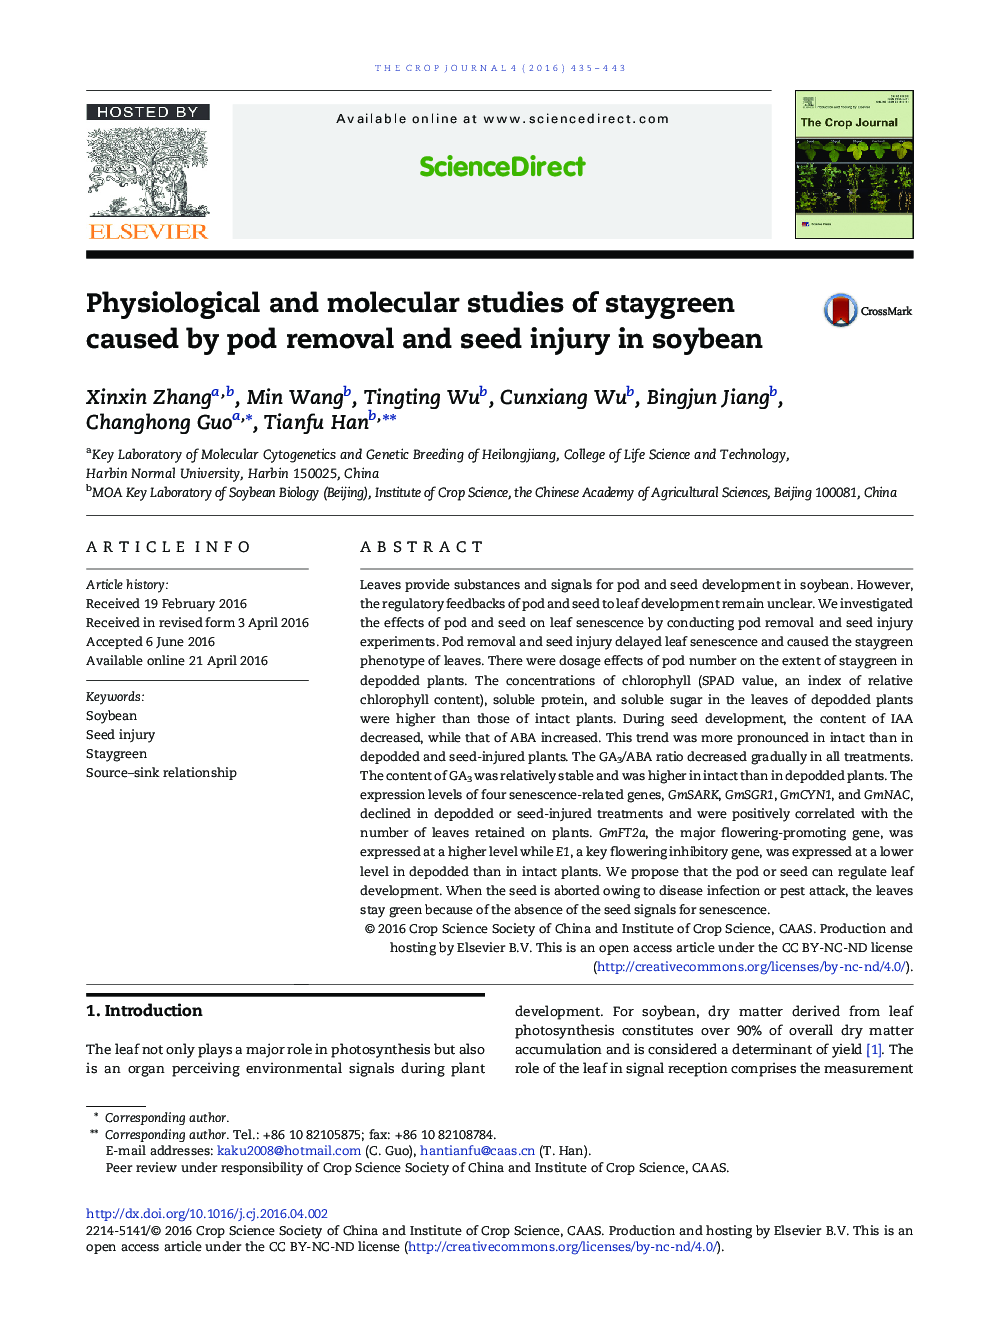 Physiological and molecular studies of staygreen caused by pod removal and seed injury in soybean